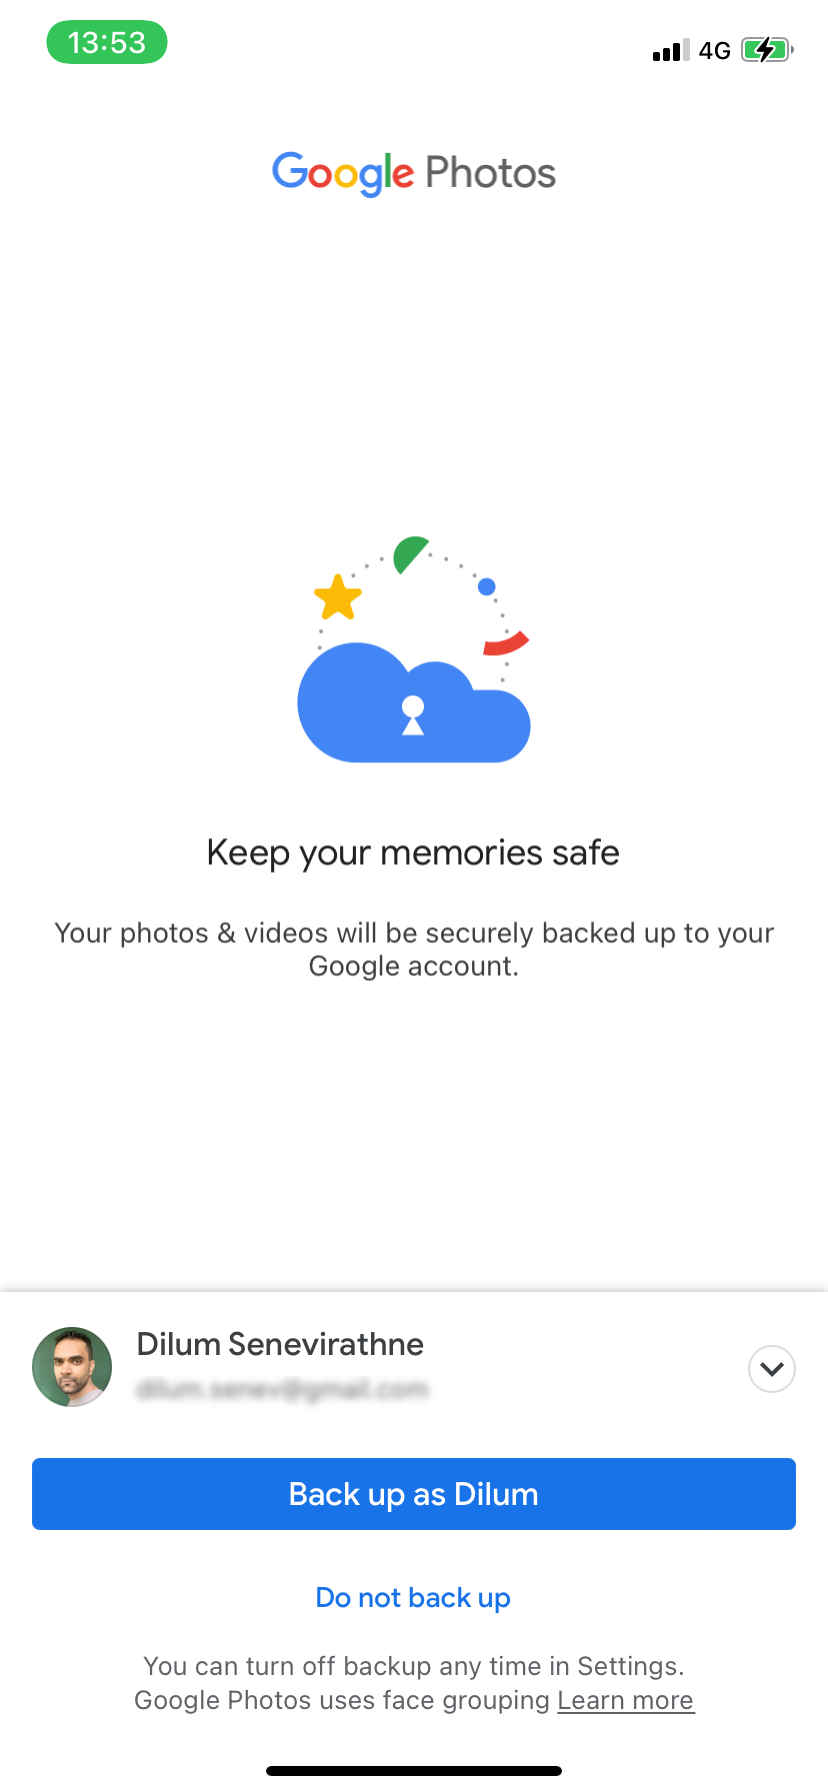 Choosing to back up to Google Photos.